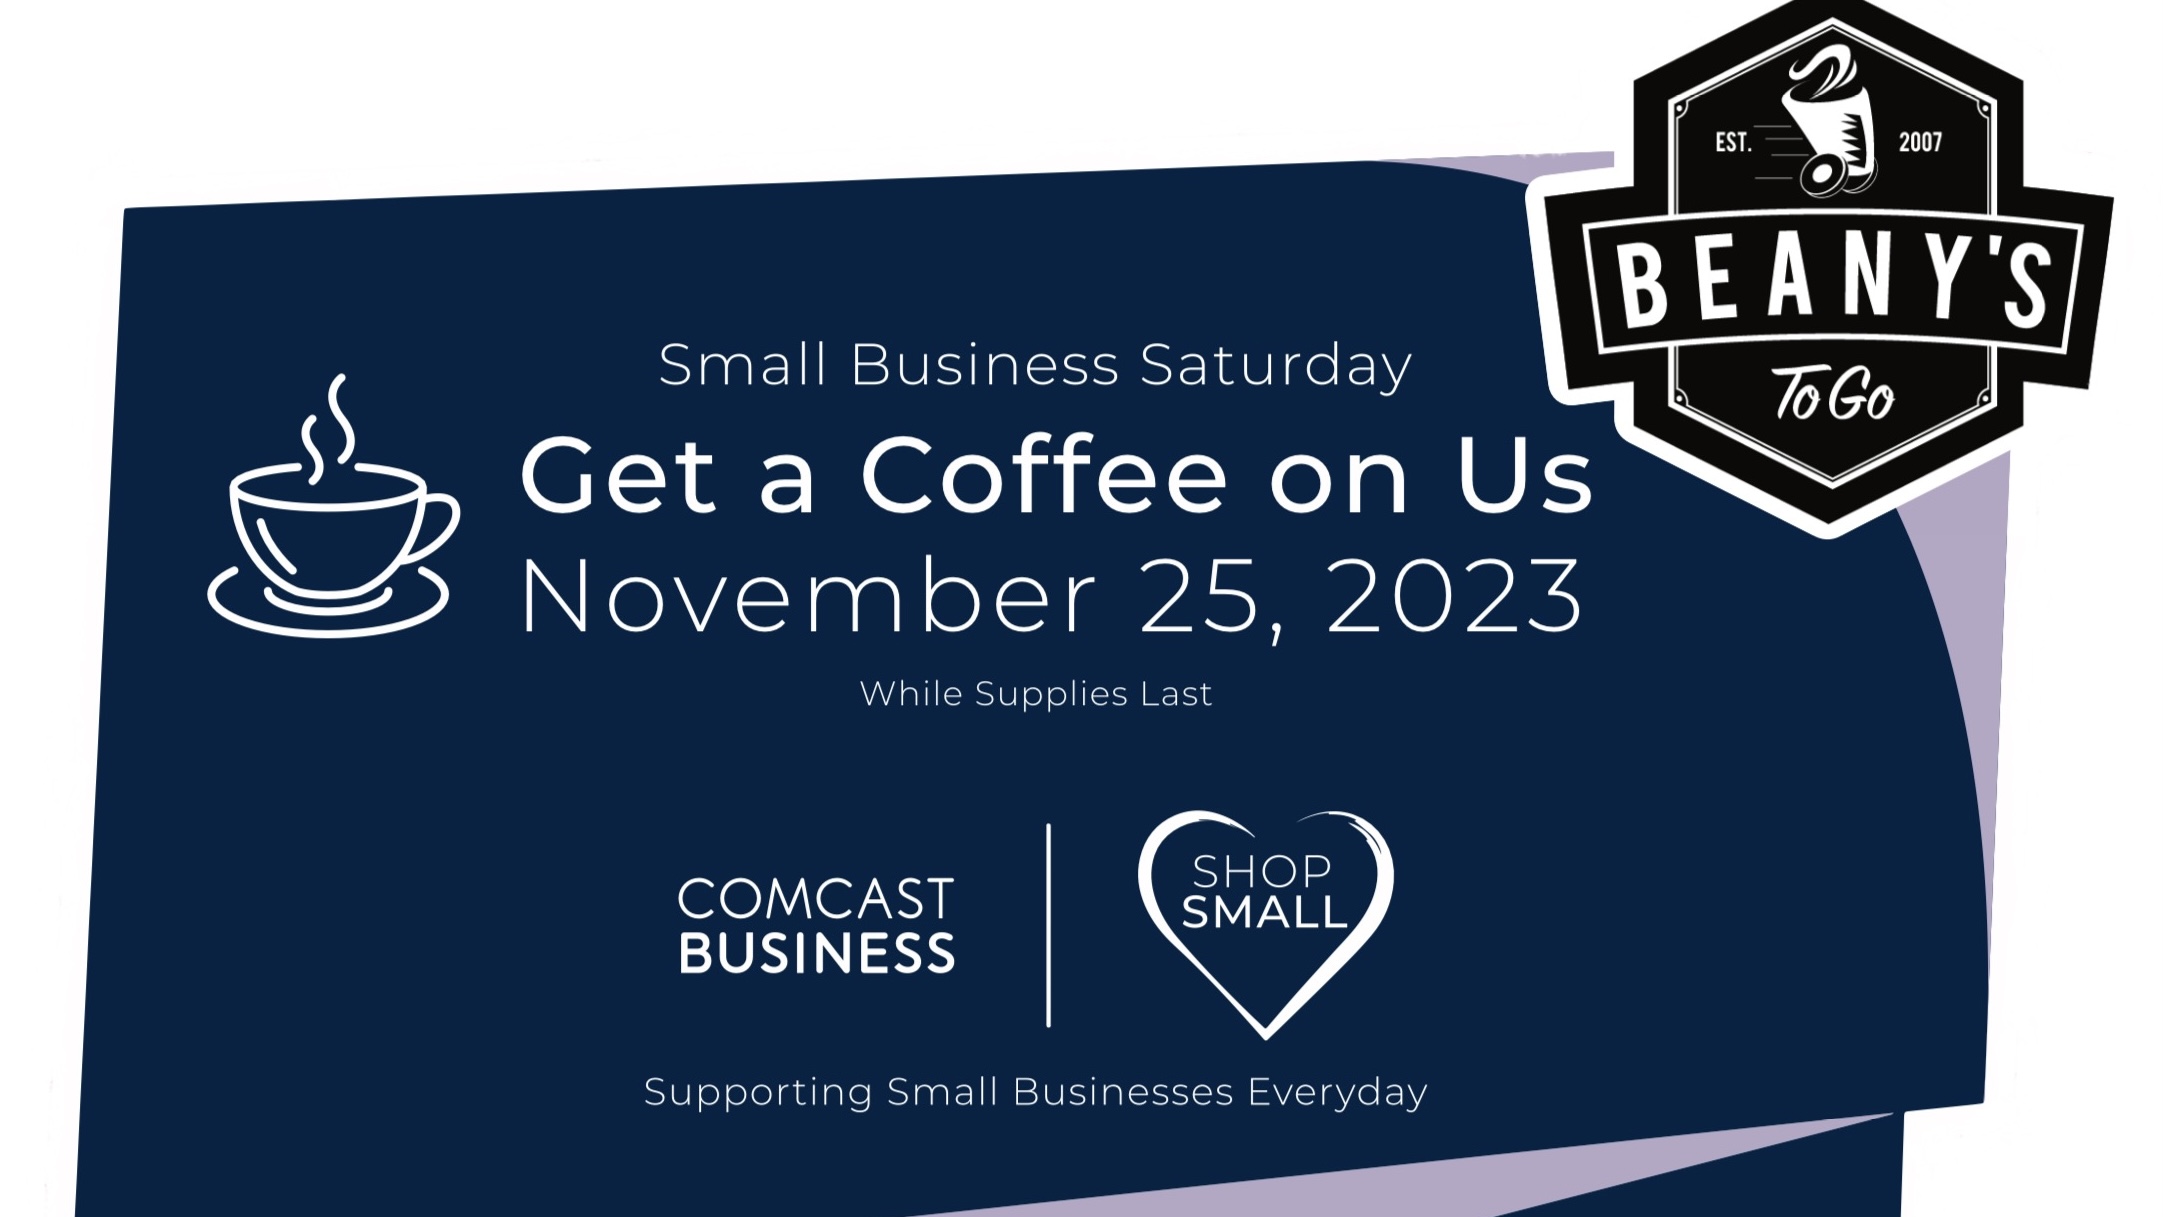 Comcast and Beany’s To Go Partner on Small Business Saturday Giveaway 